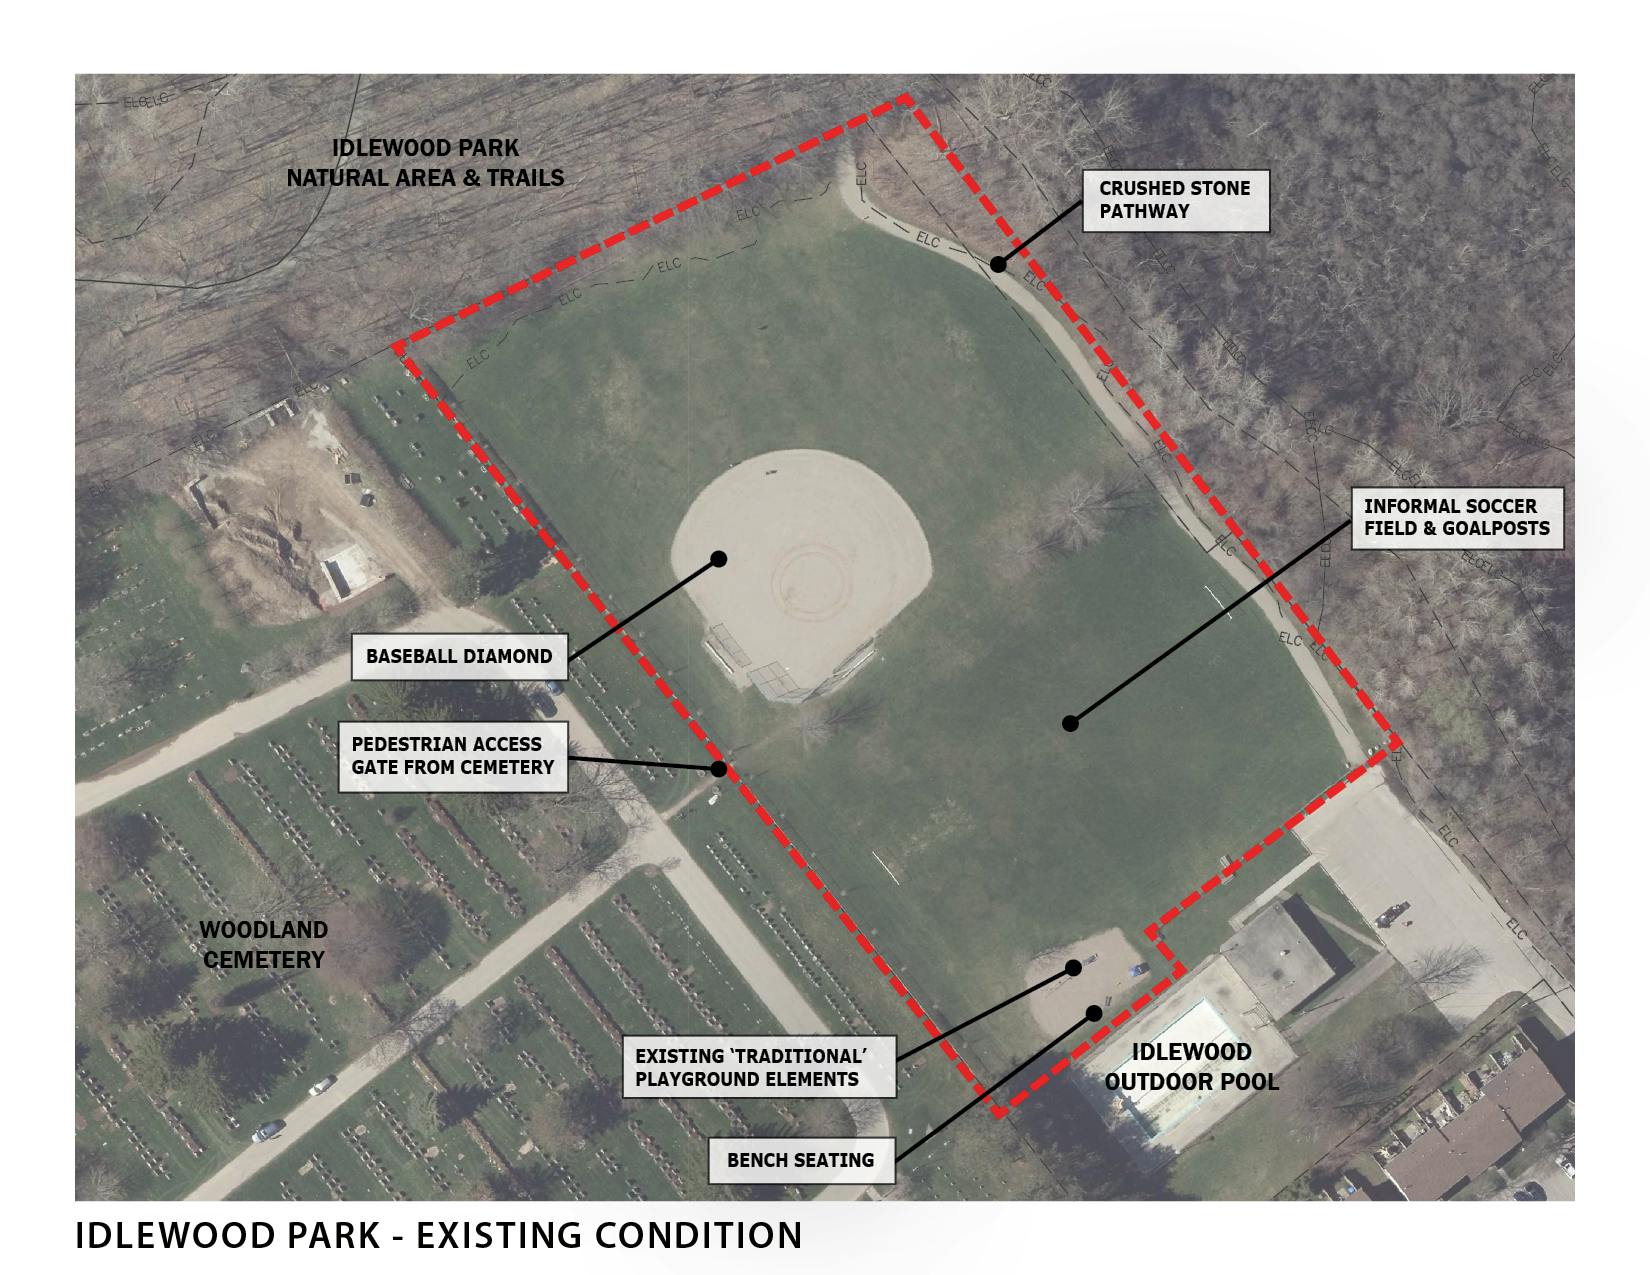 Idlewood Park - Existing Condition